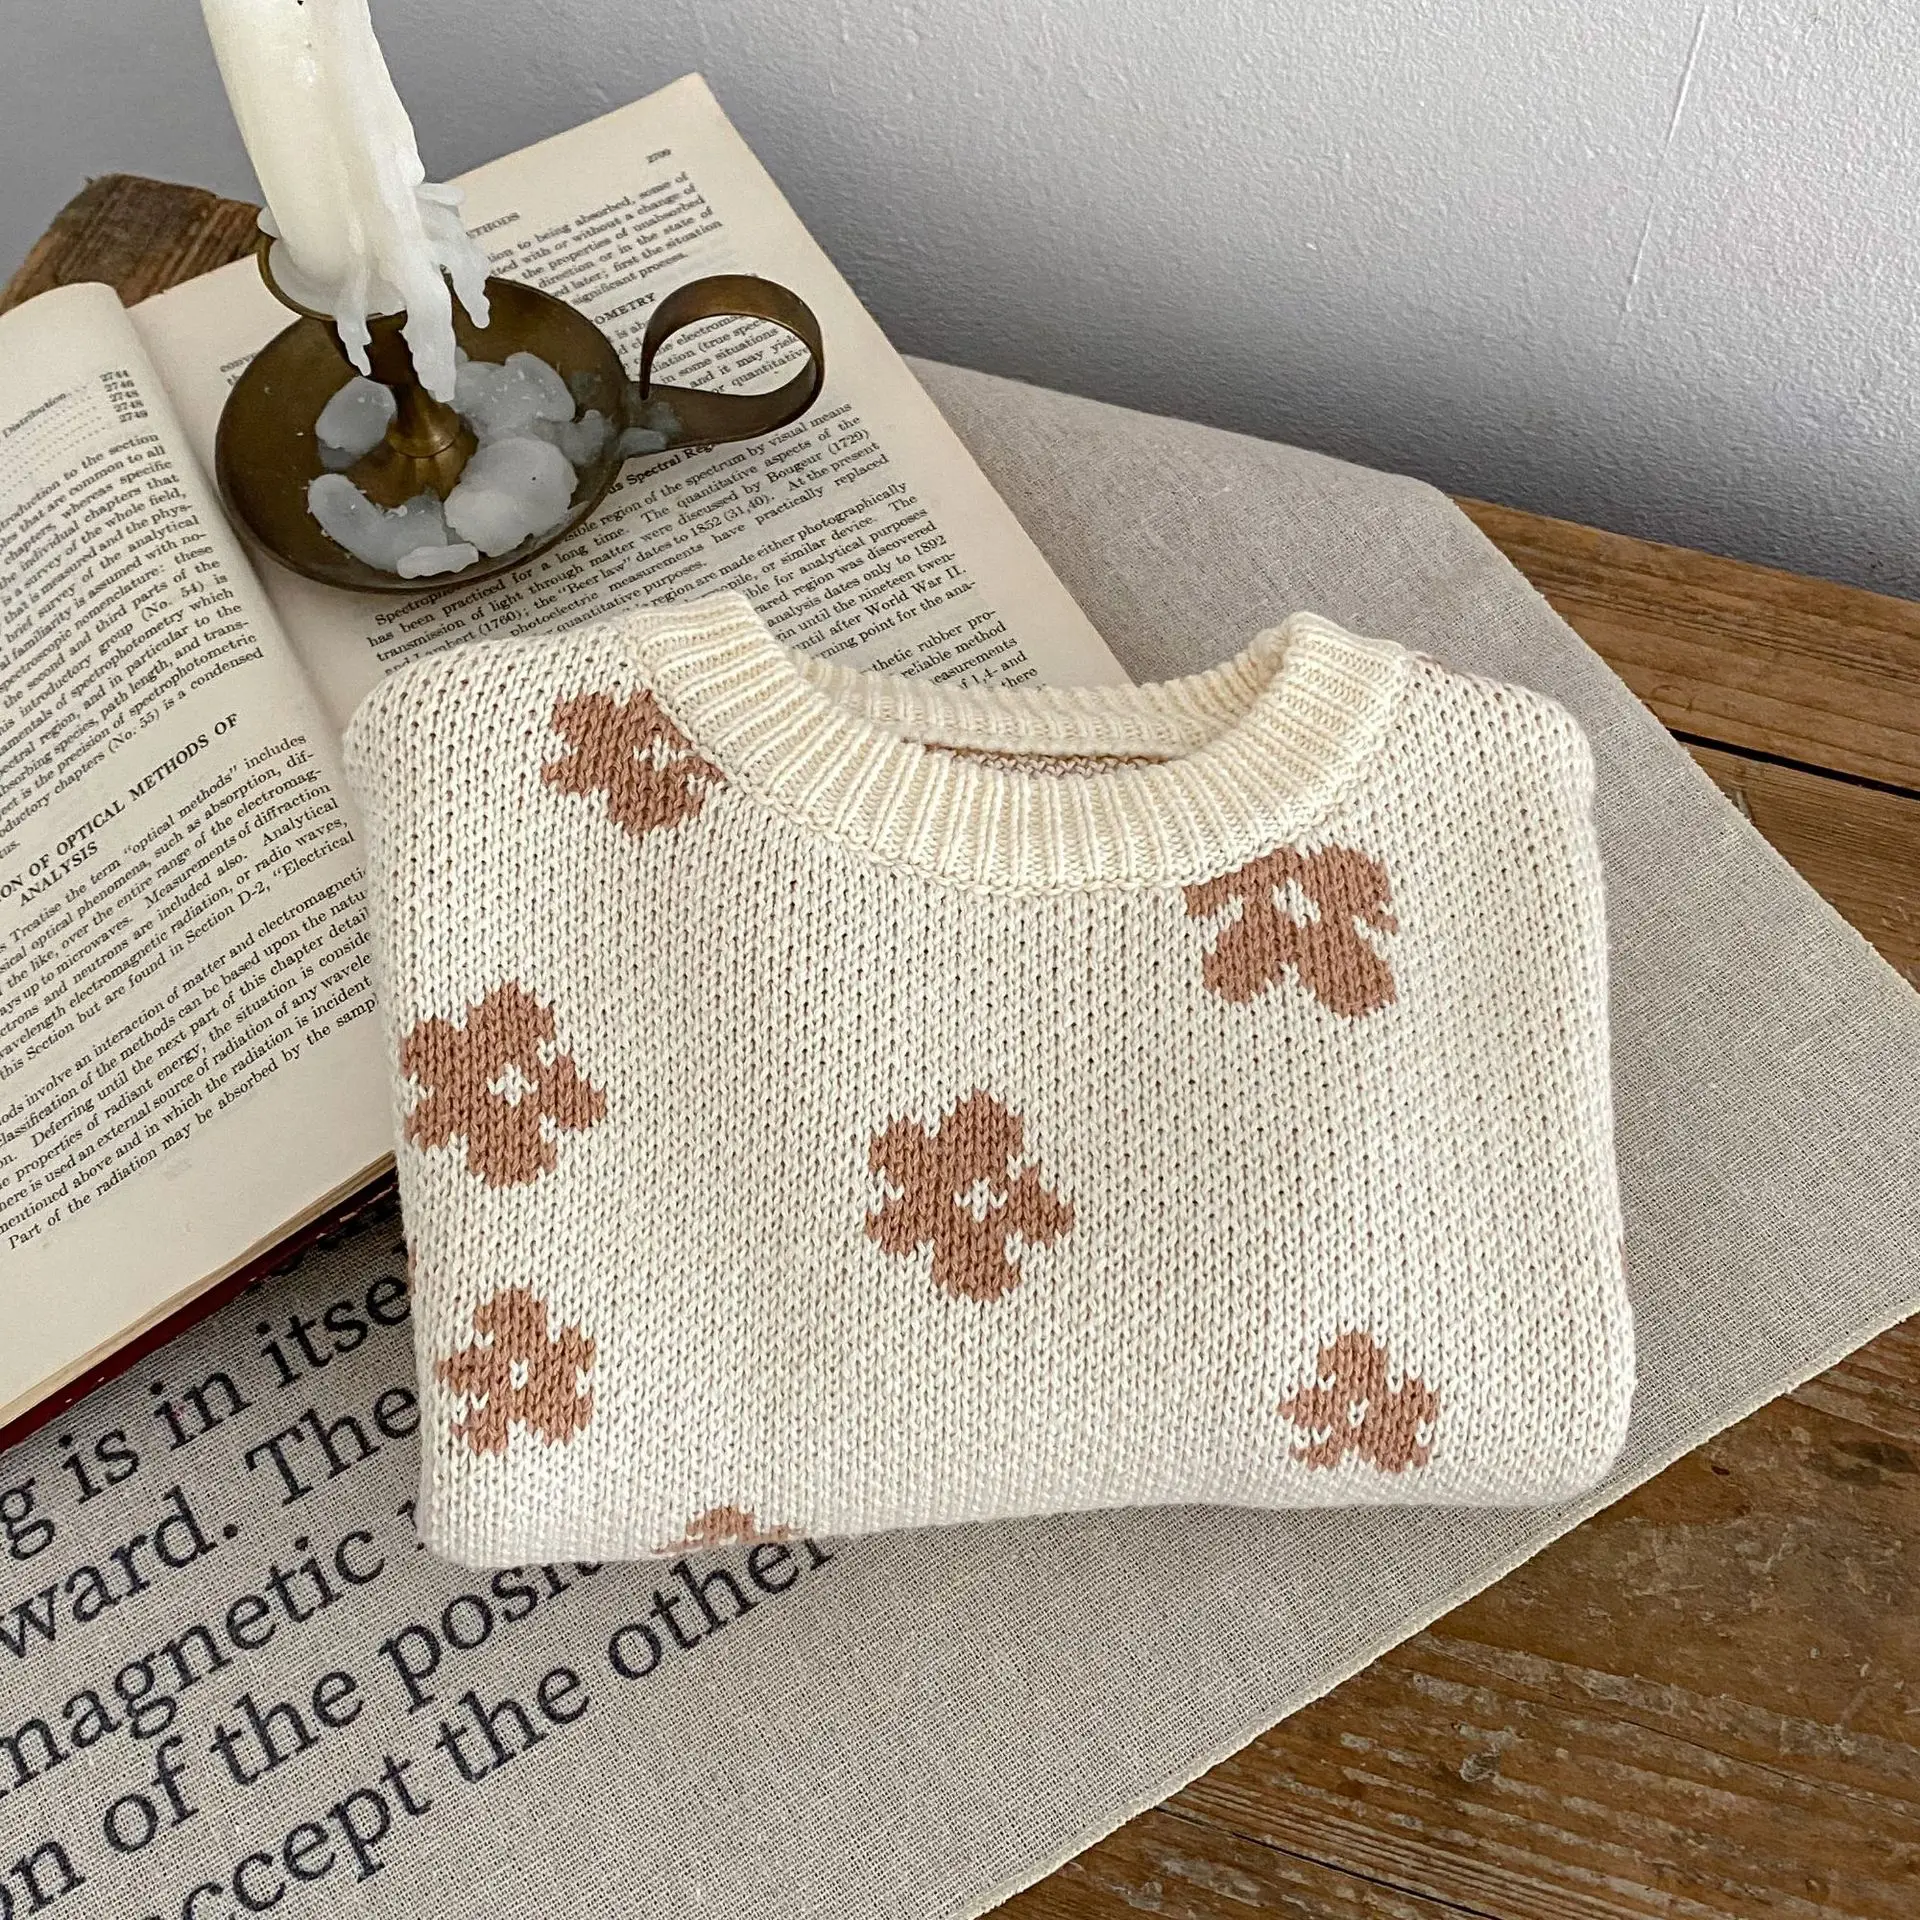 Engepapa Autumn Infant Pullover Knit Girls Flower Jacquard Sweater Cotton Baby Clothes